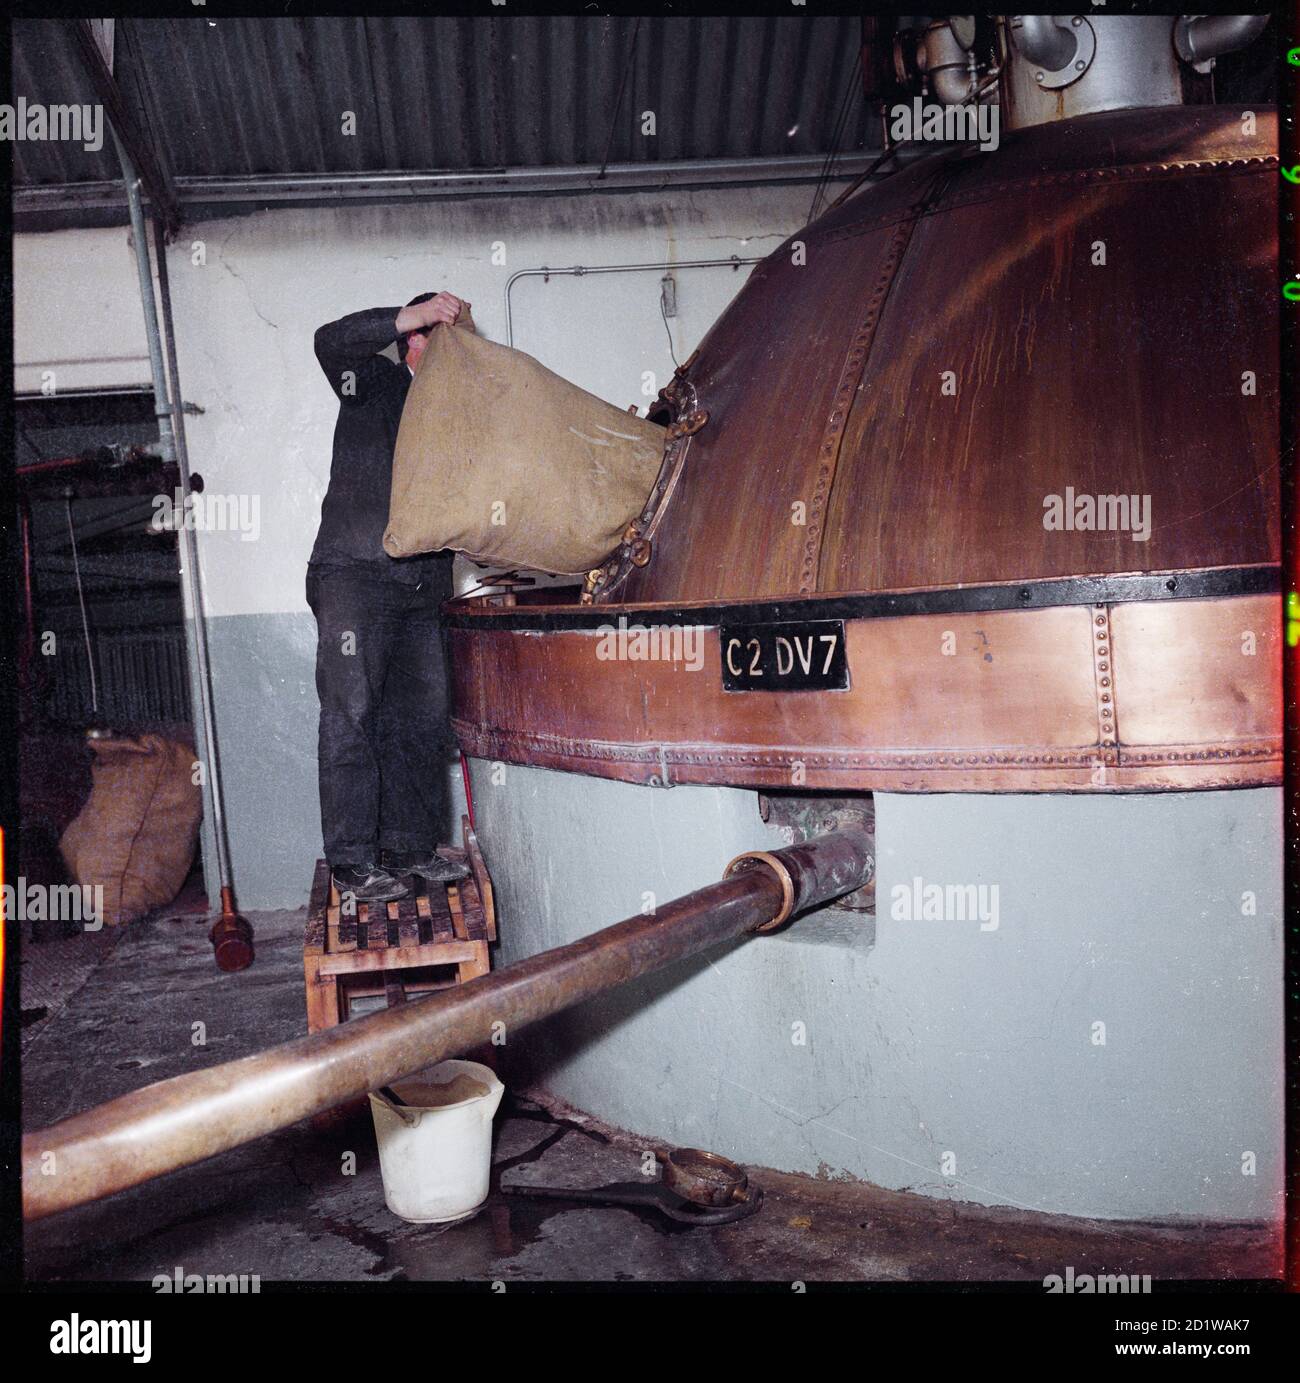 McMullen's Brewery, Hartham Lane, Hertford, Hertfordshire. Hops being added to a copper boiling kettle (brew kettle) at McMullen's Hertford Brewery. Stock Photo